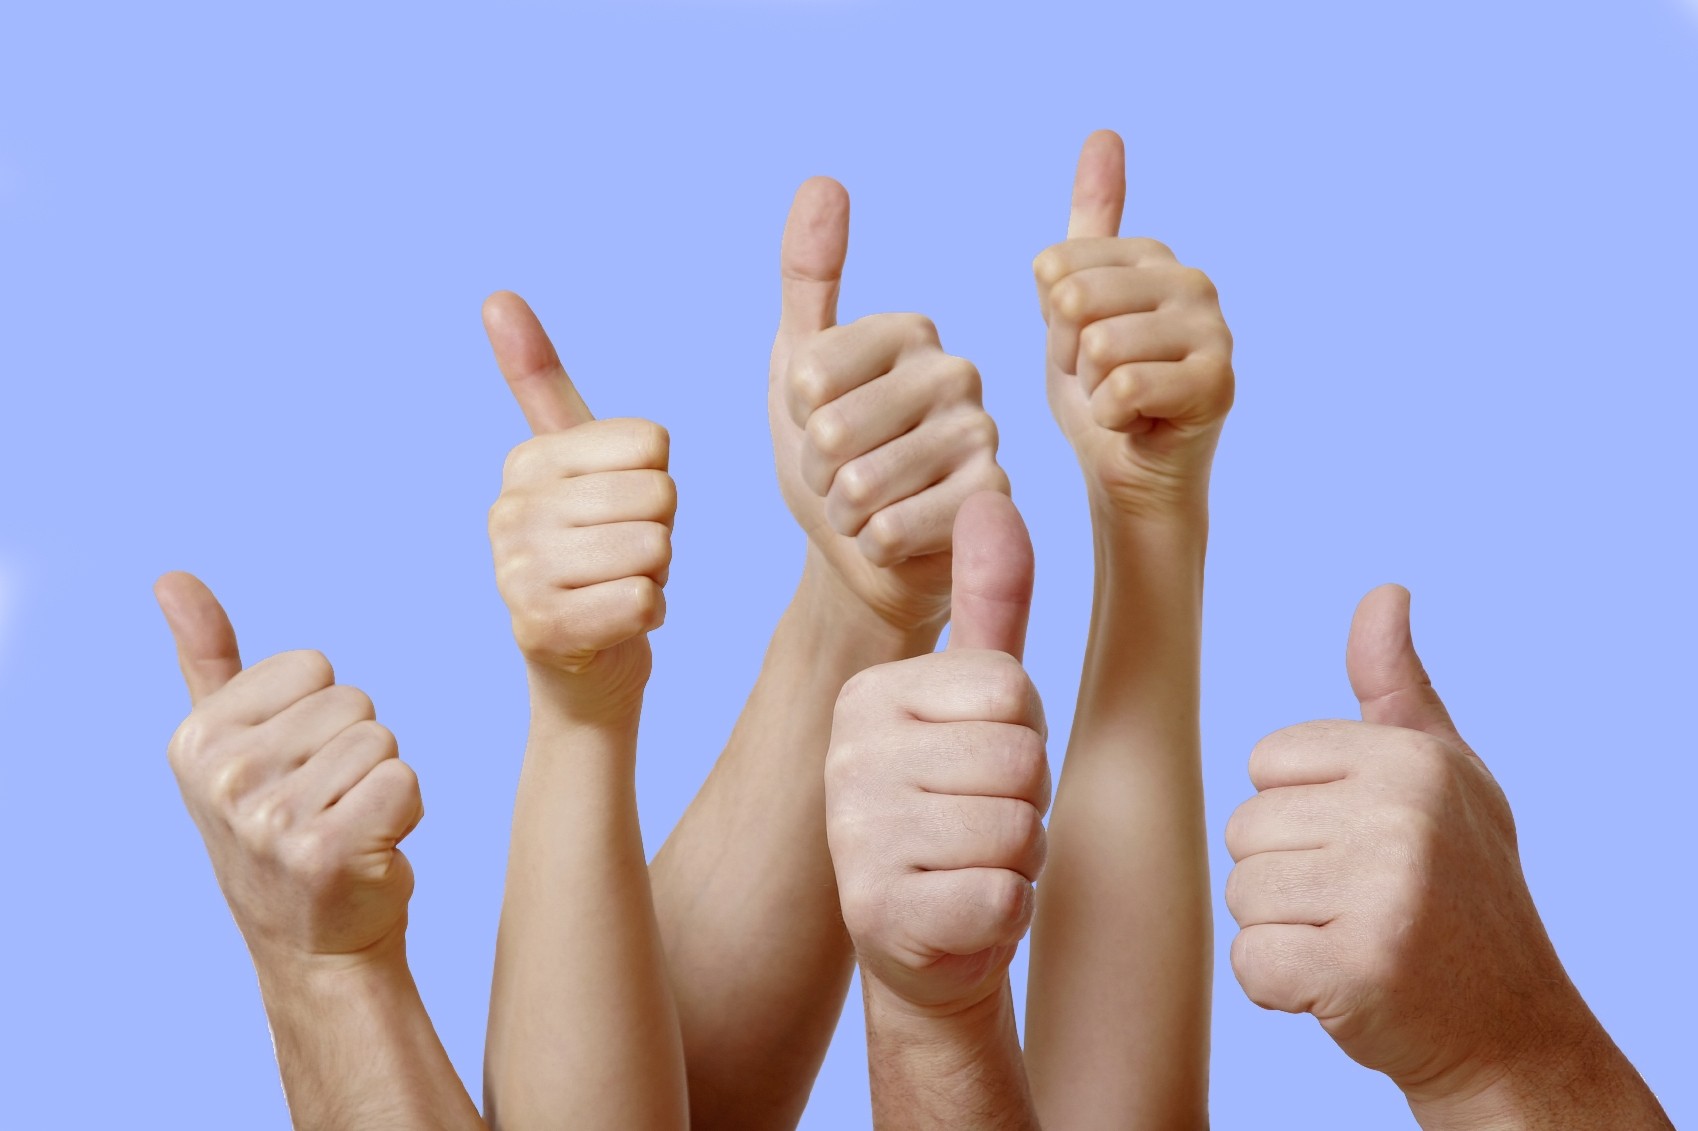 Hands Simple Background Thumbs Up Blue Background Hand Gesture 1698x1131